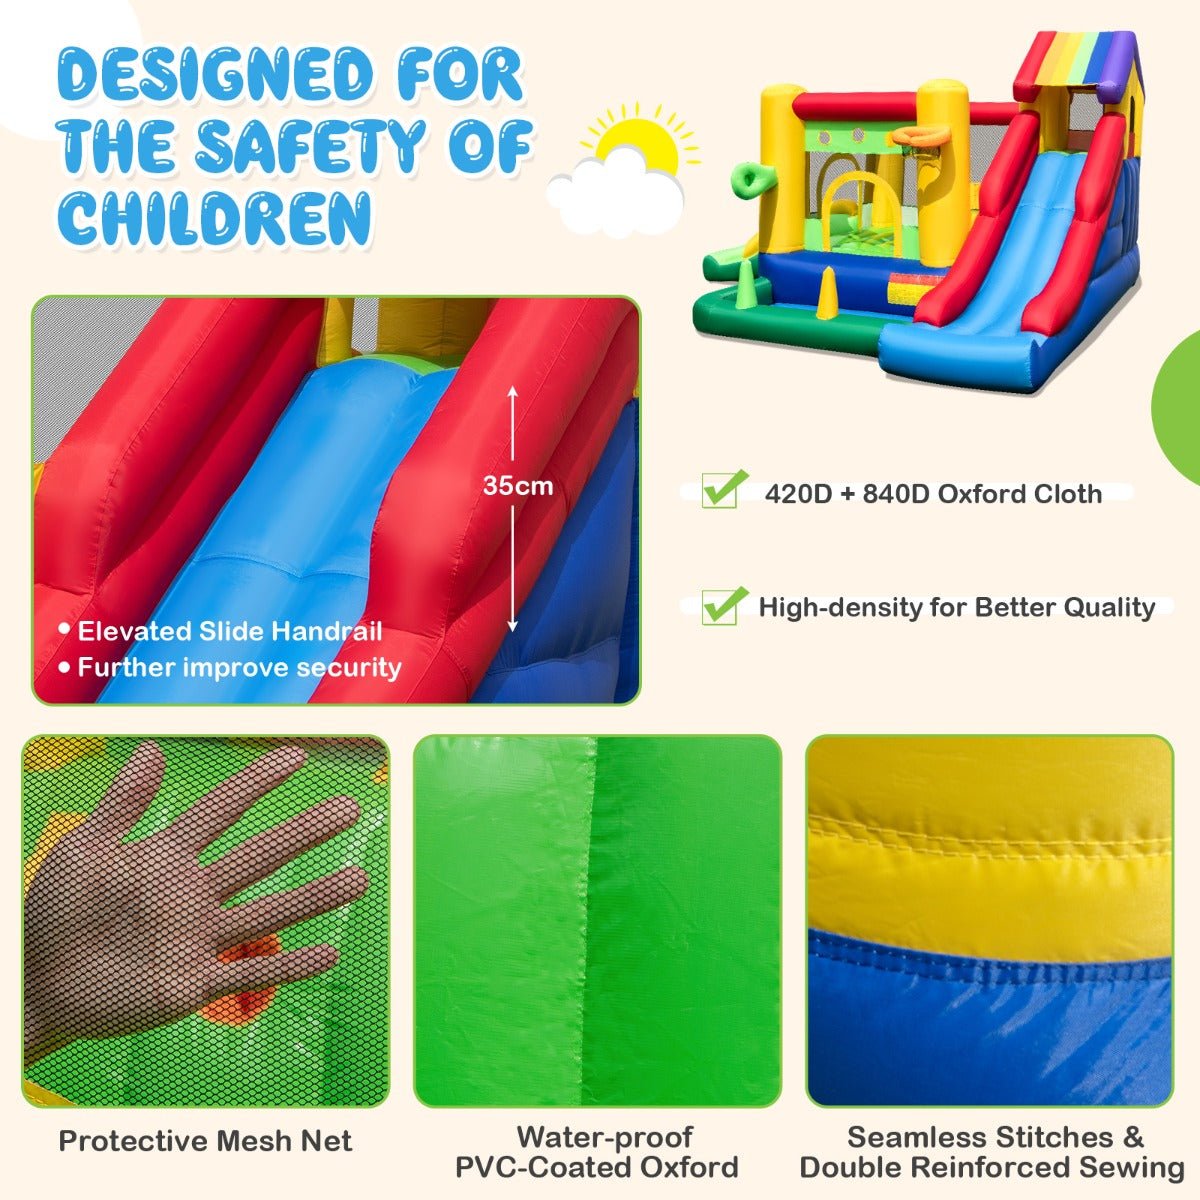 Bounce and Slide with the 7-In-1 Rainbow Castle Inflatable - Order Today!